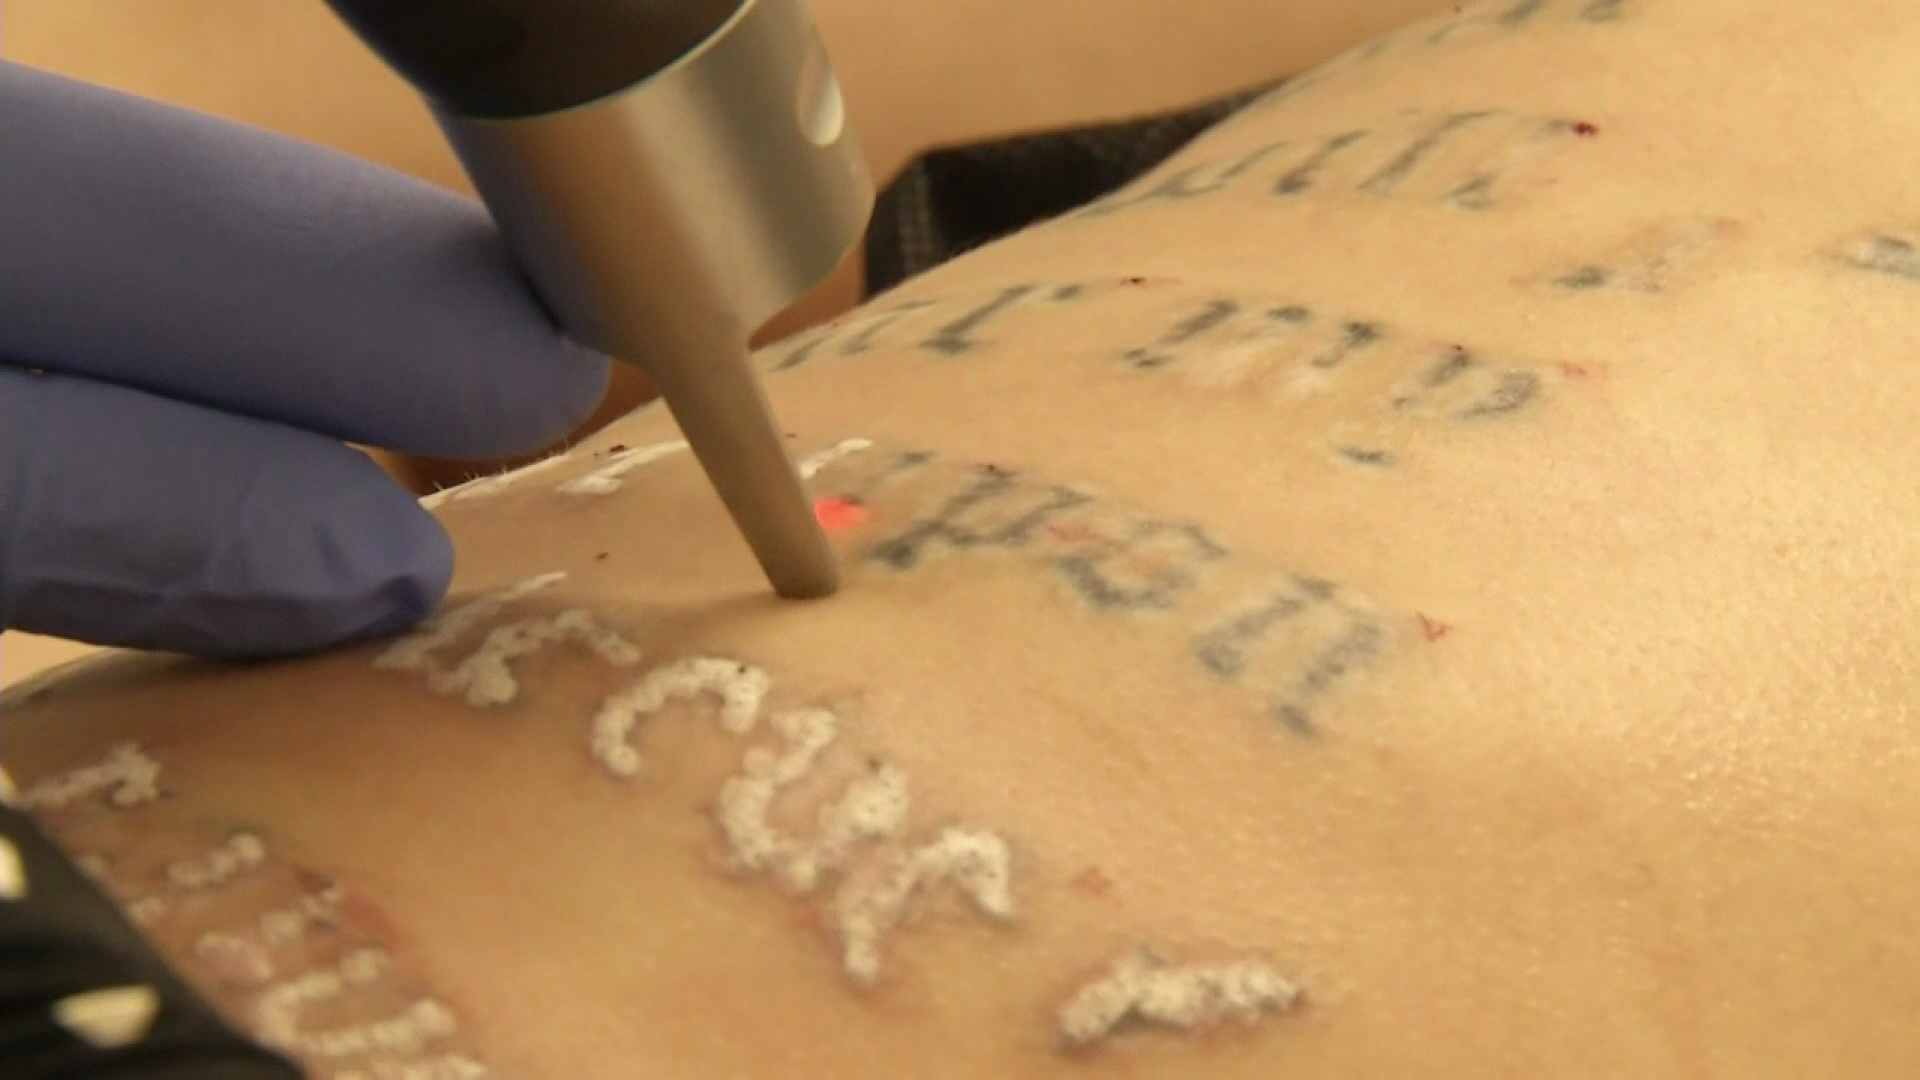 New laser cuts down tattoo removal time